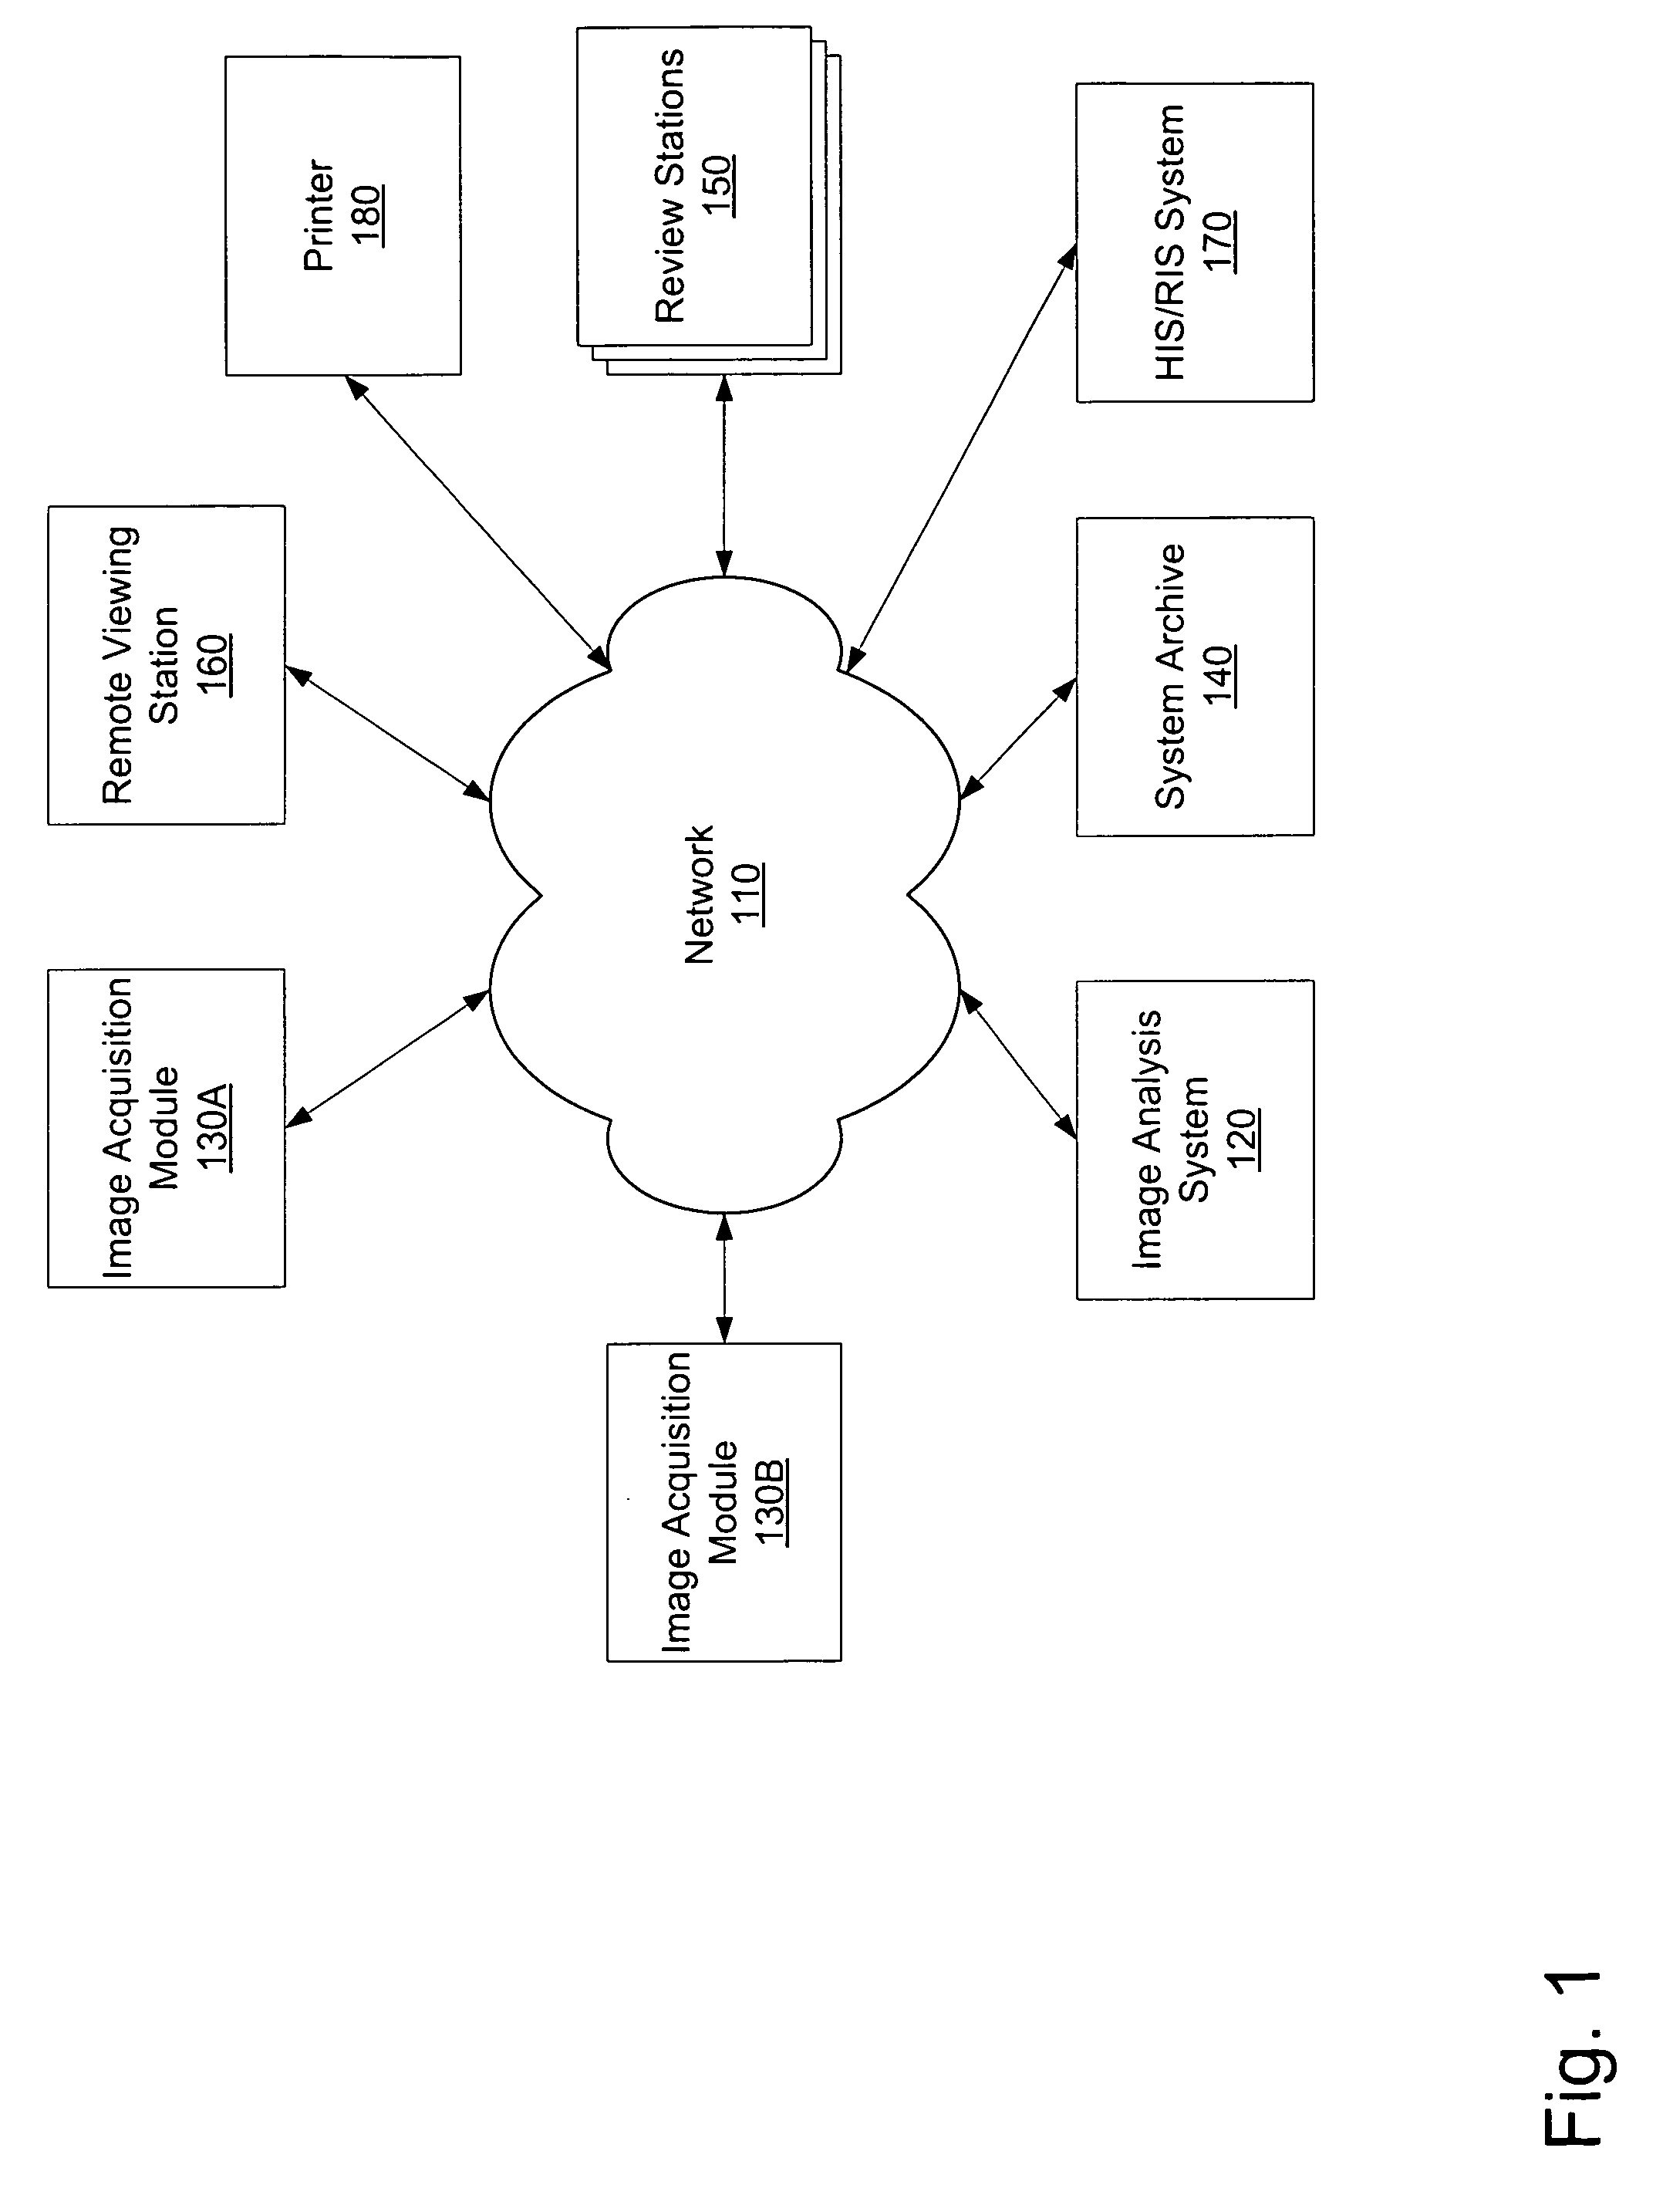 Method and apparatus for an improved computer aided diagnosis system